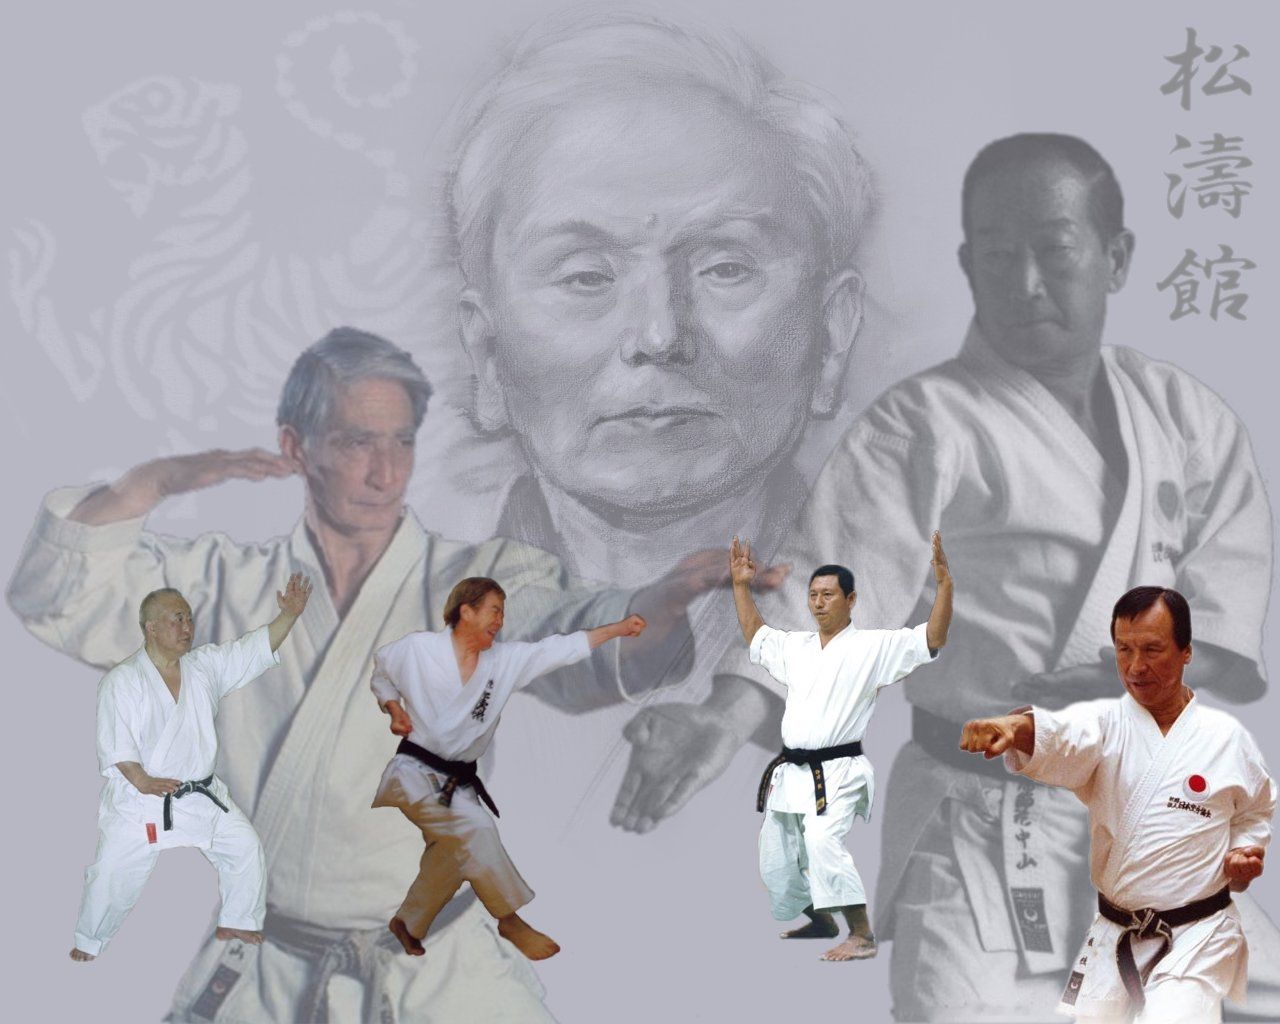 Free download to download Wallpaper CLICK HERE [1280x1024] for your Desktop, Mobile & Tablet. Explore Shotokan Karate Wallpaper. Shotokan Karate Wallpaper, Karate Wallpaper, Karate Wallpaper